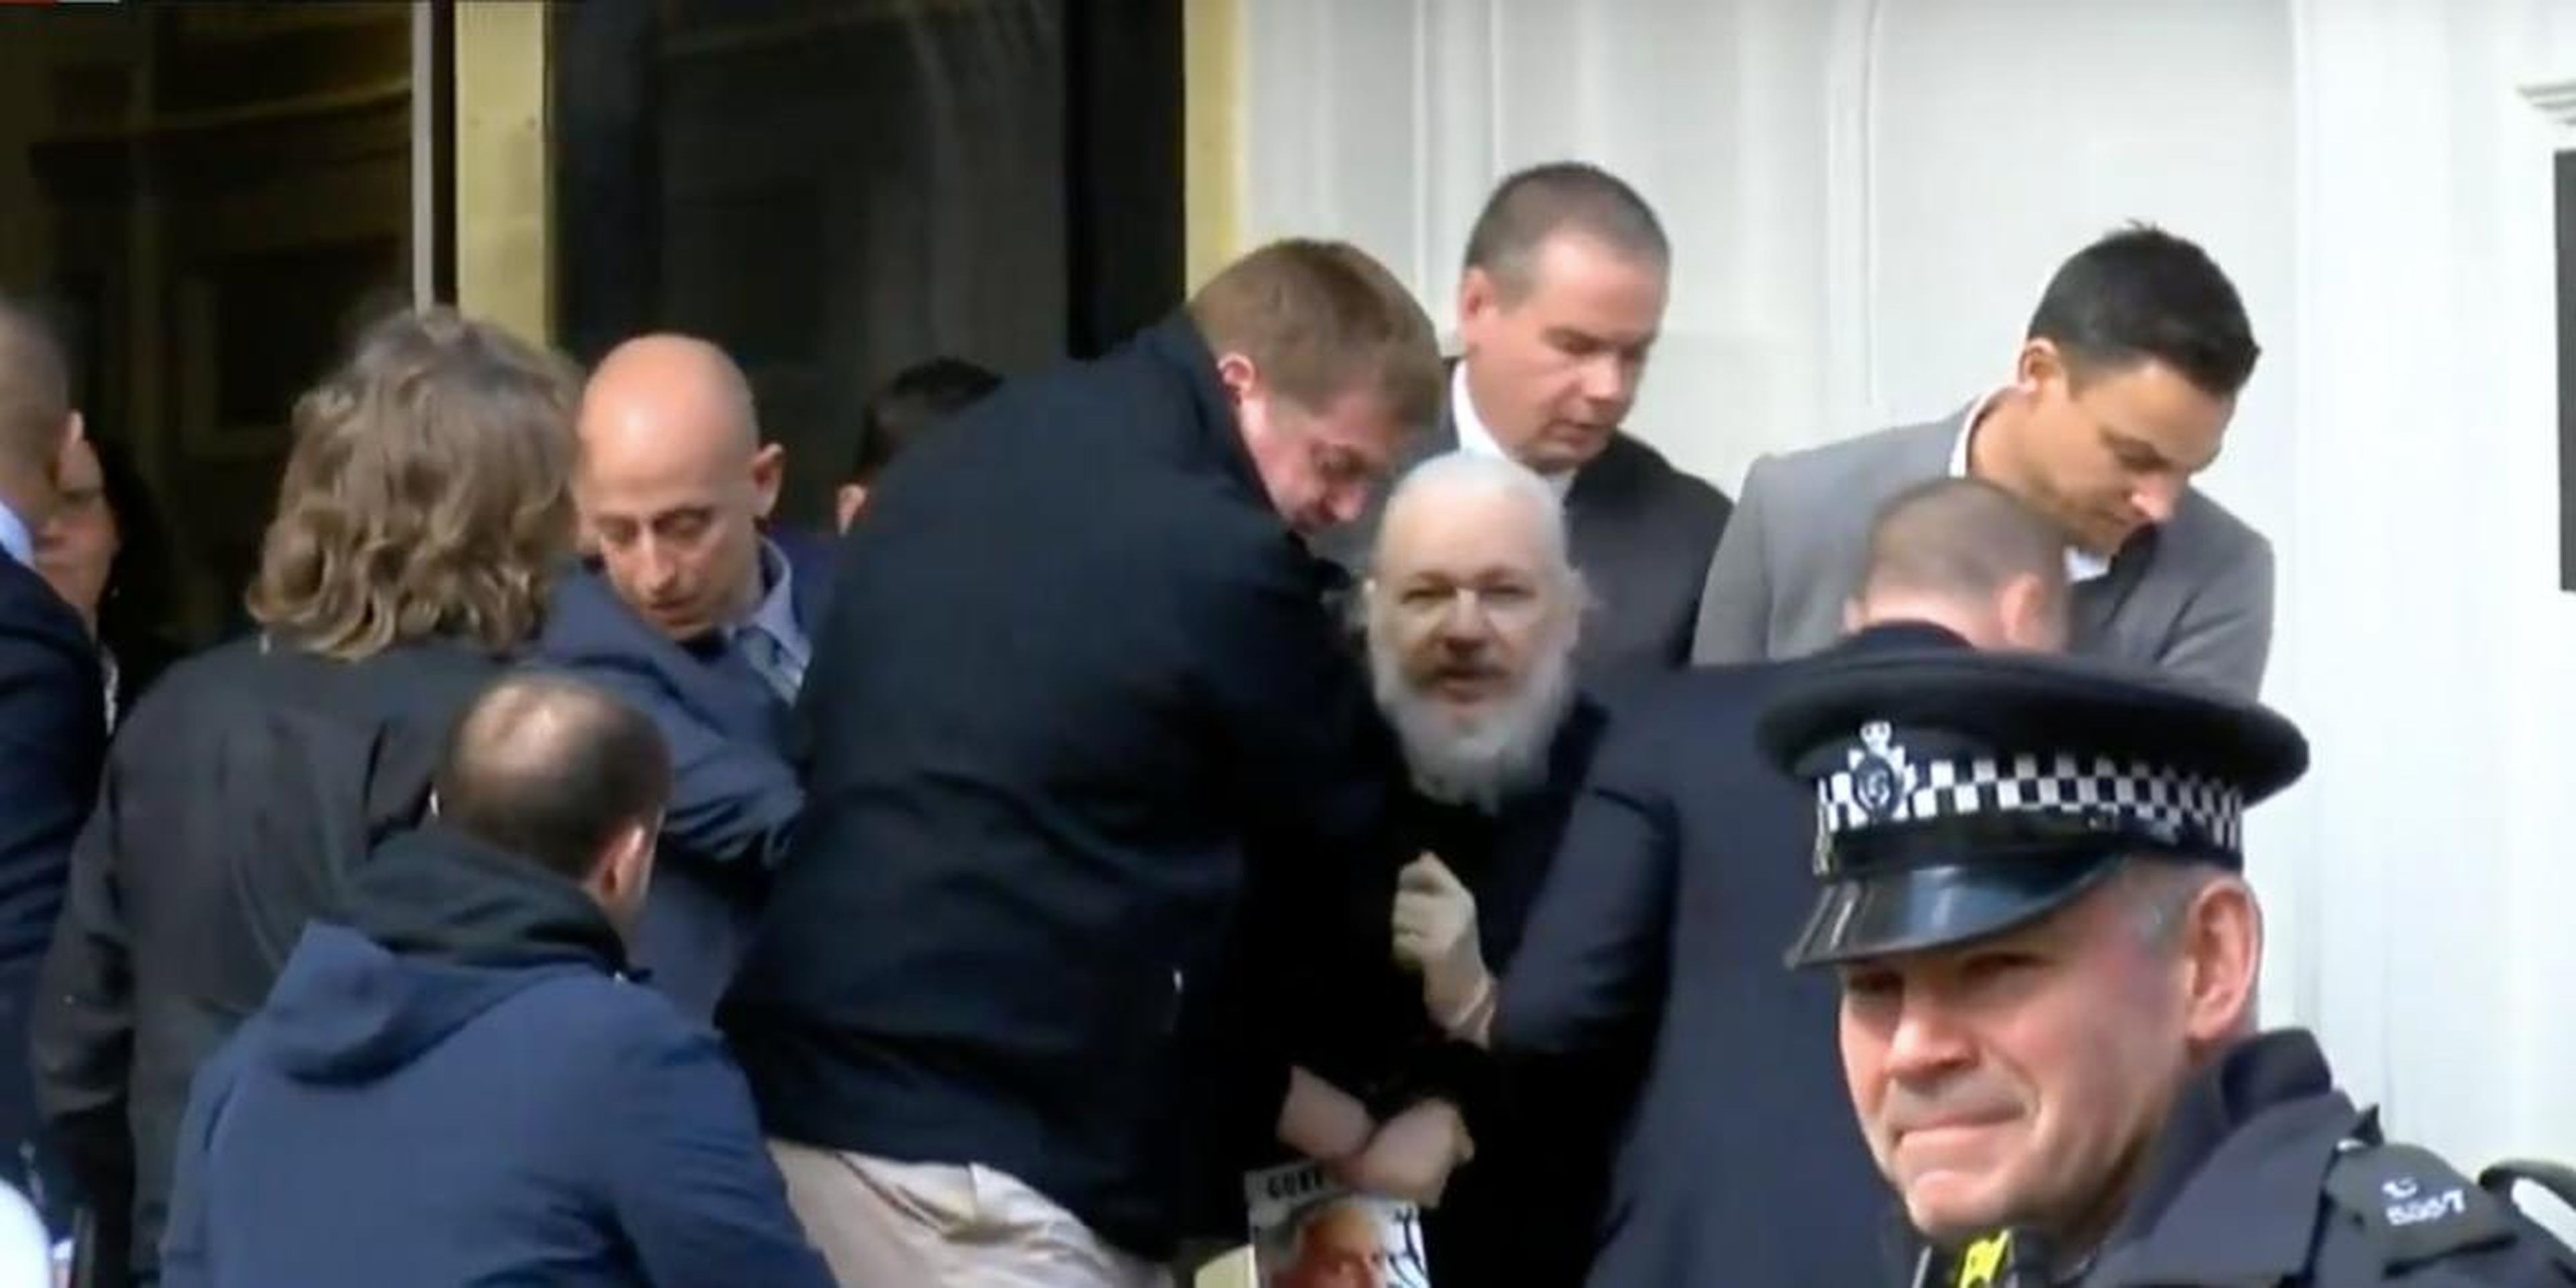 Julian Assange, center, being removed from Ecuador's embassy in London, April 11, 2019.